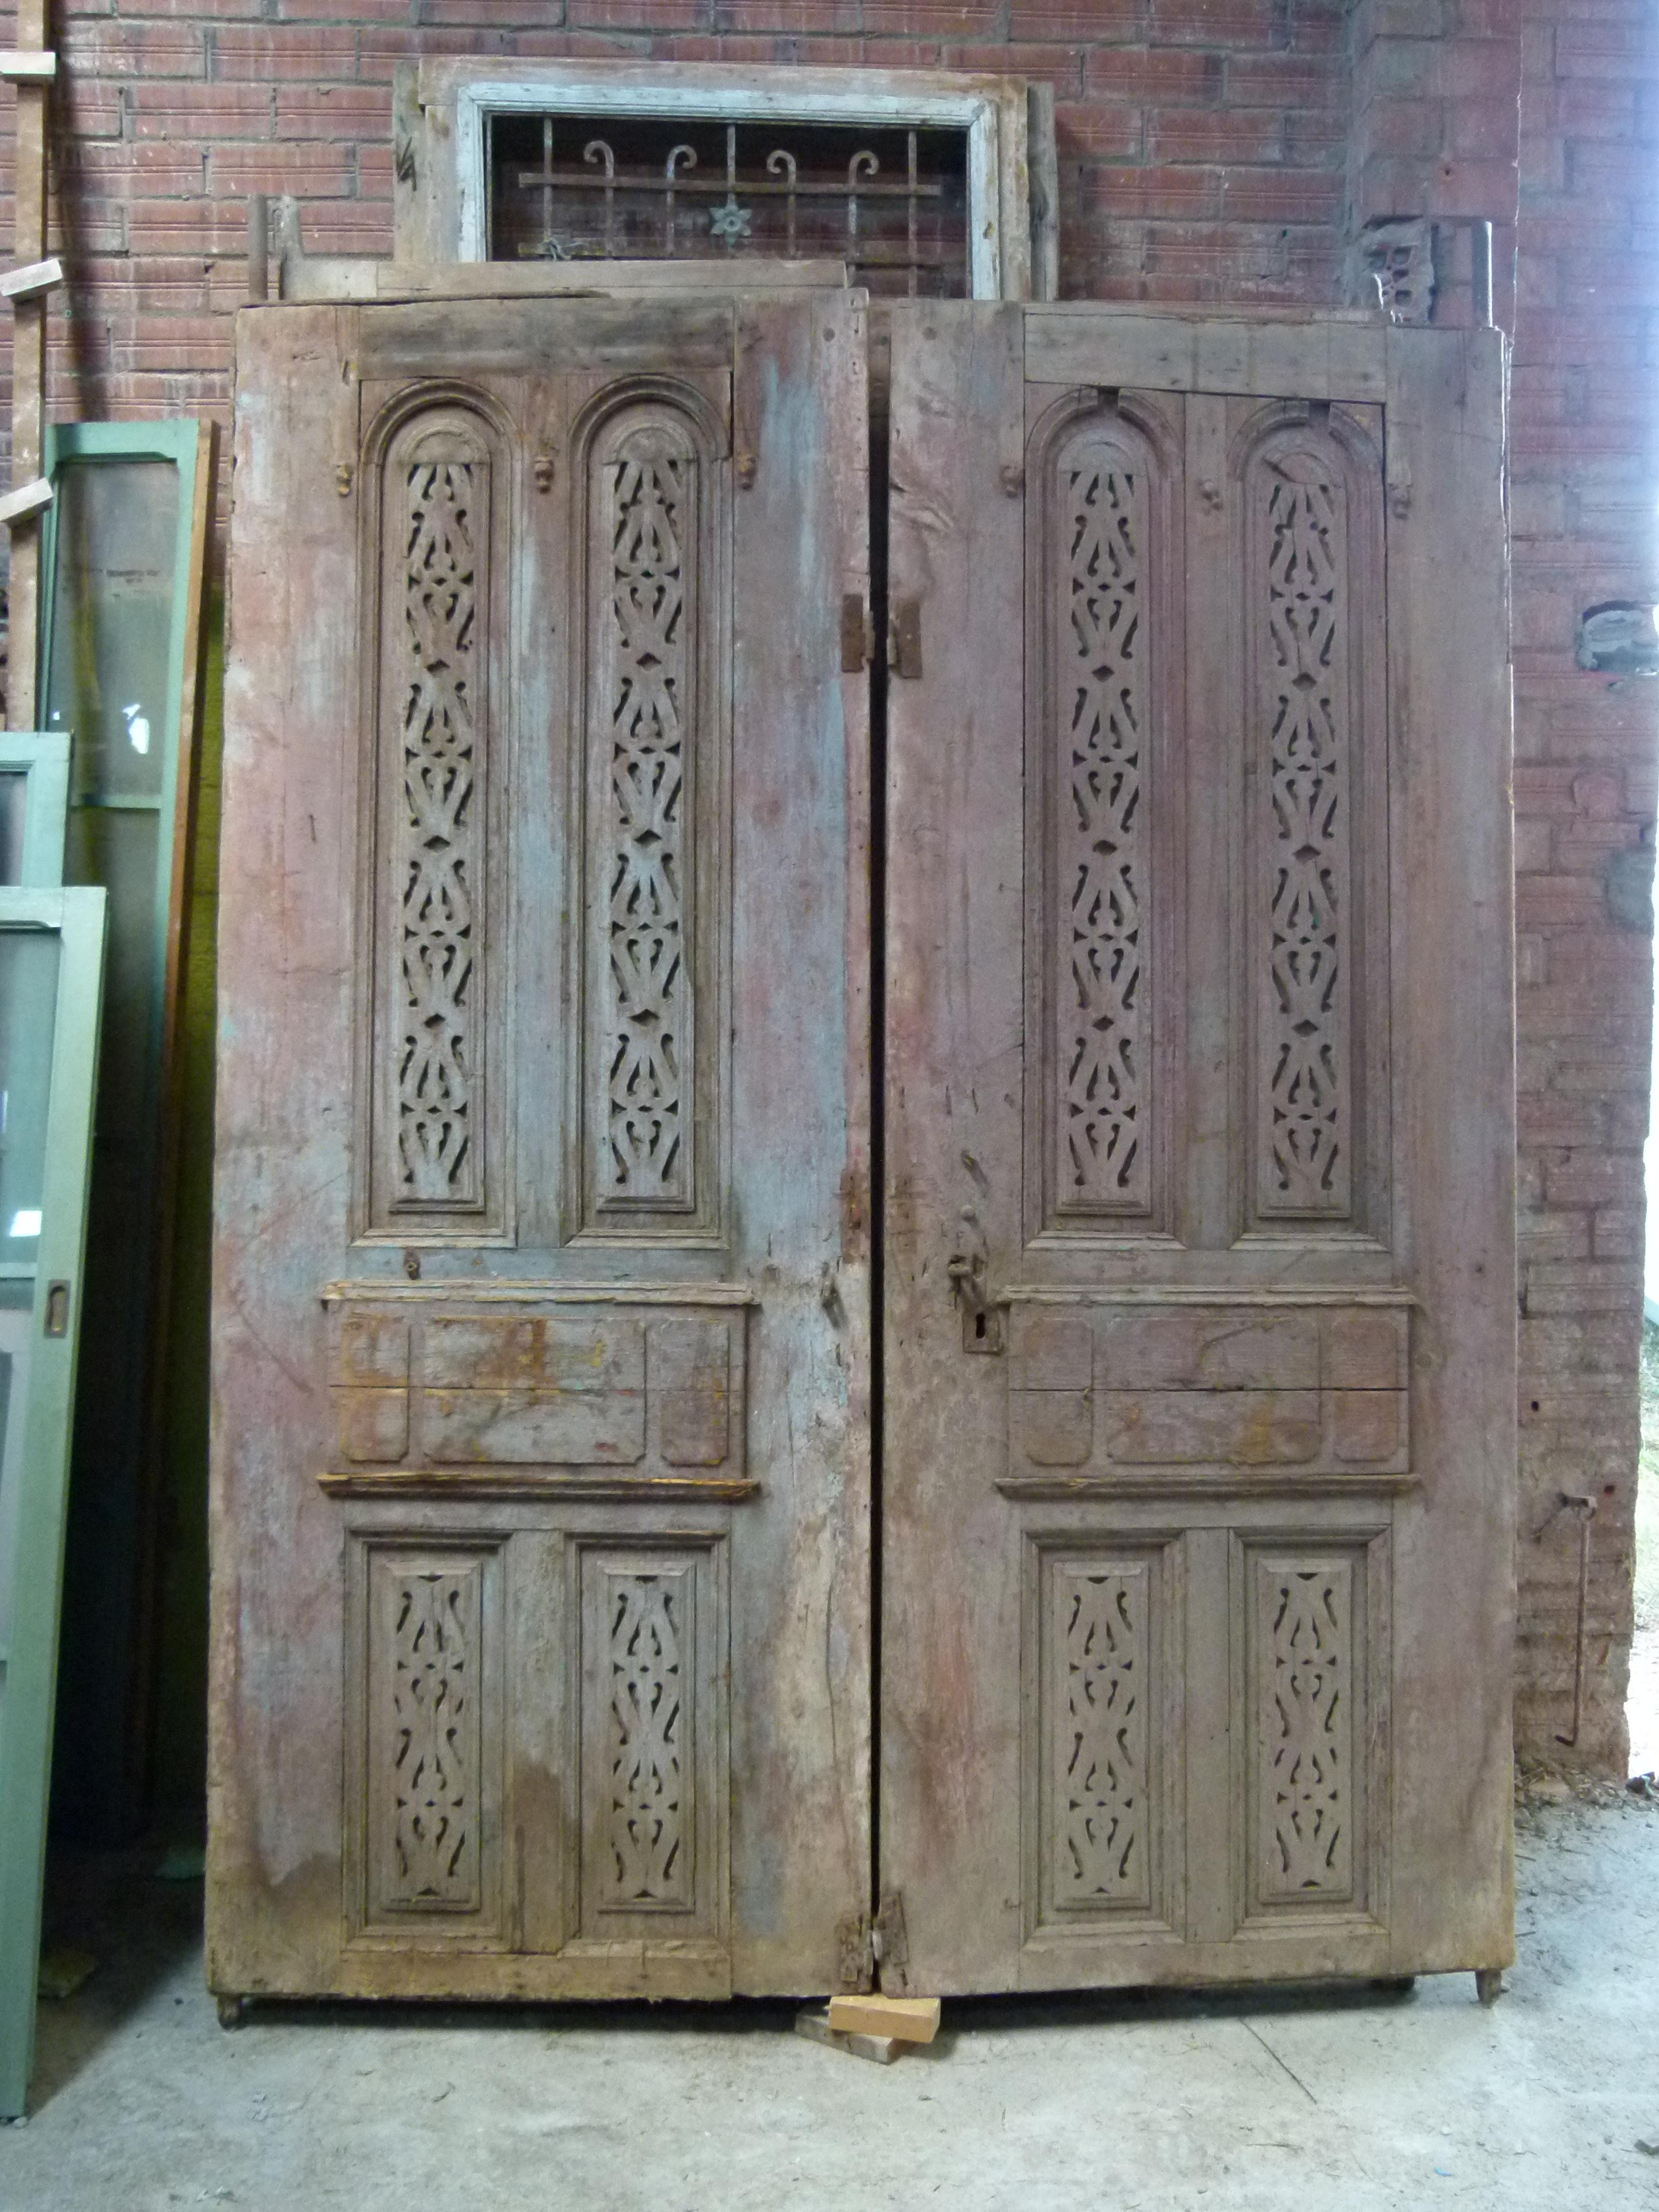 19th century wooden double door portal in Art Nouveau style from Catalonien, Spain.
Each door has 2 lateral pivots to be embedded in the stone.
The original patina of this Portal and its style will give the necessary charm to your building or